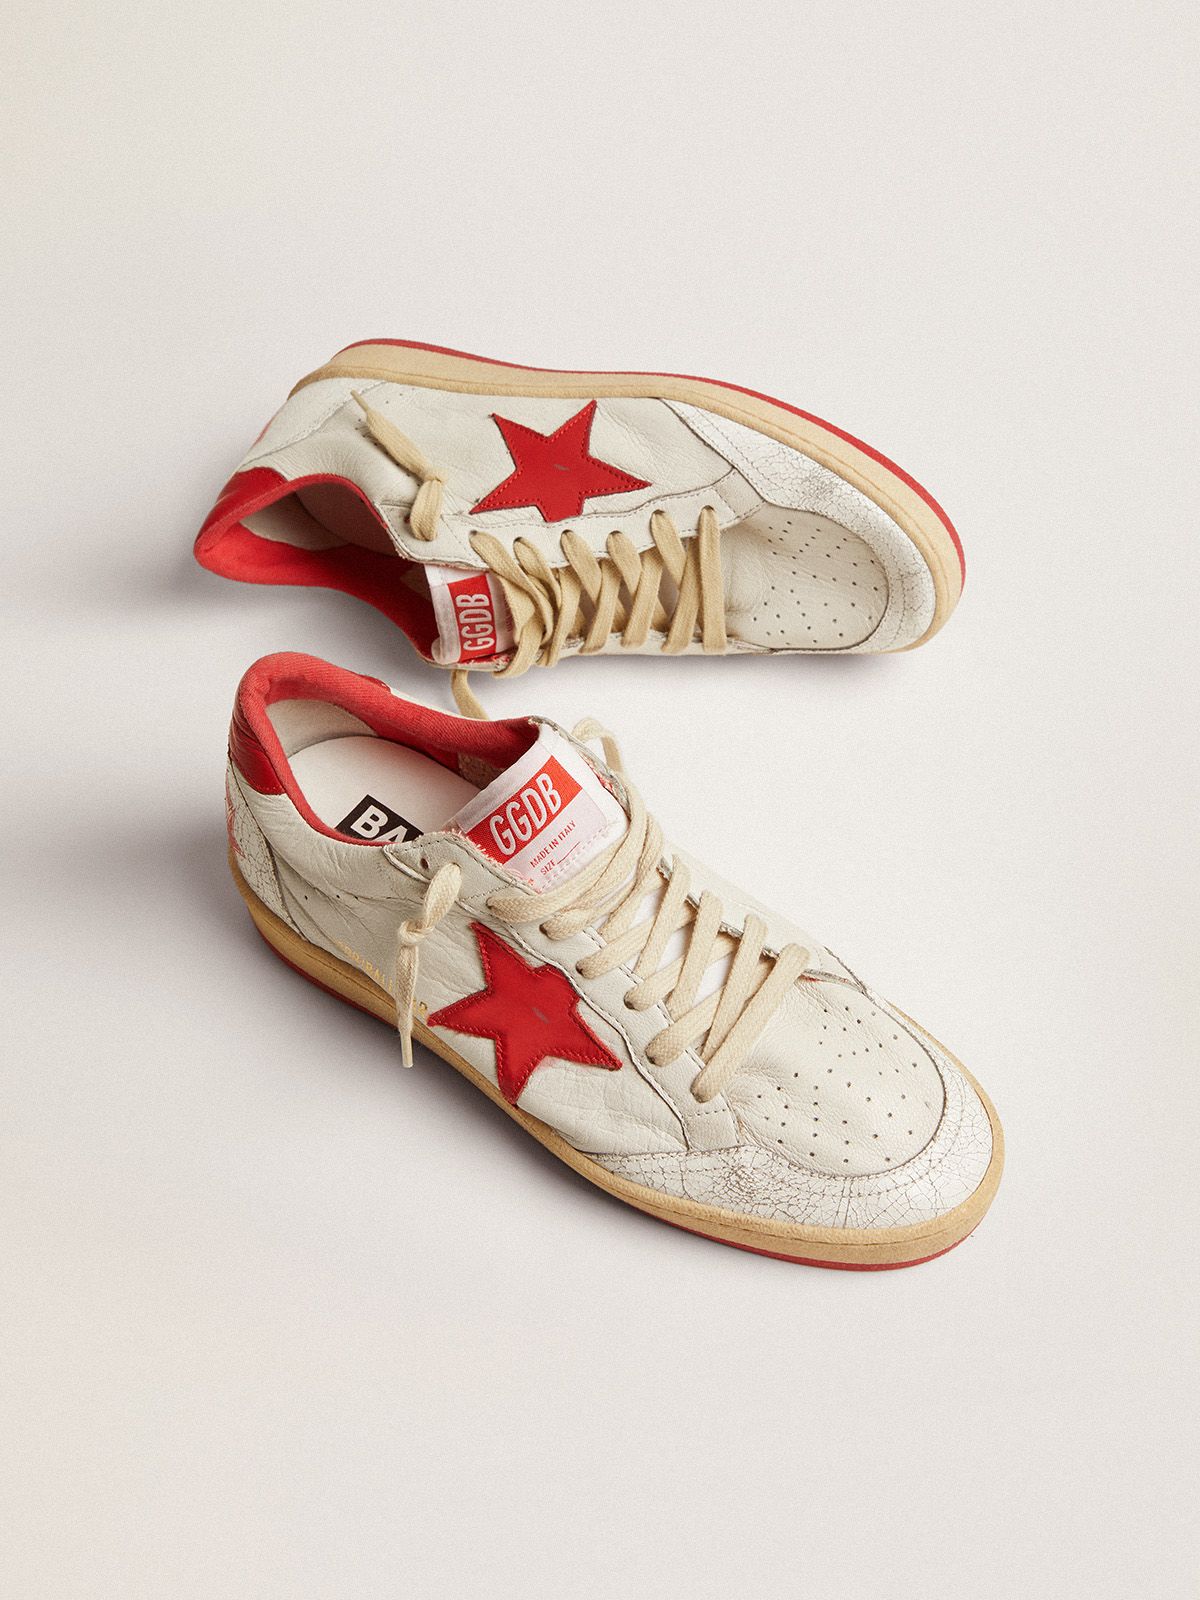 White Ball Star sneakers in leather with red star and heel tab 